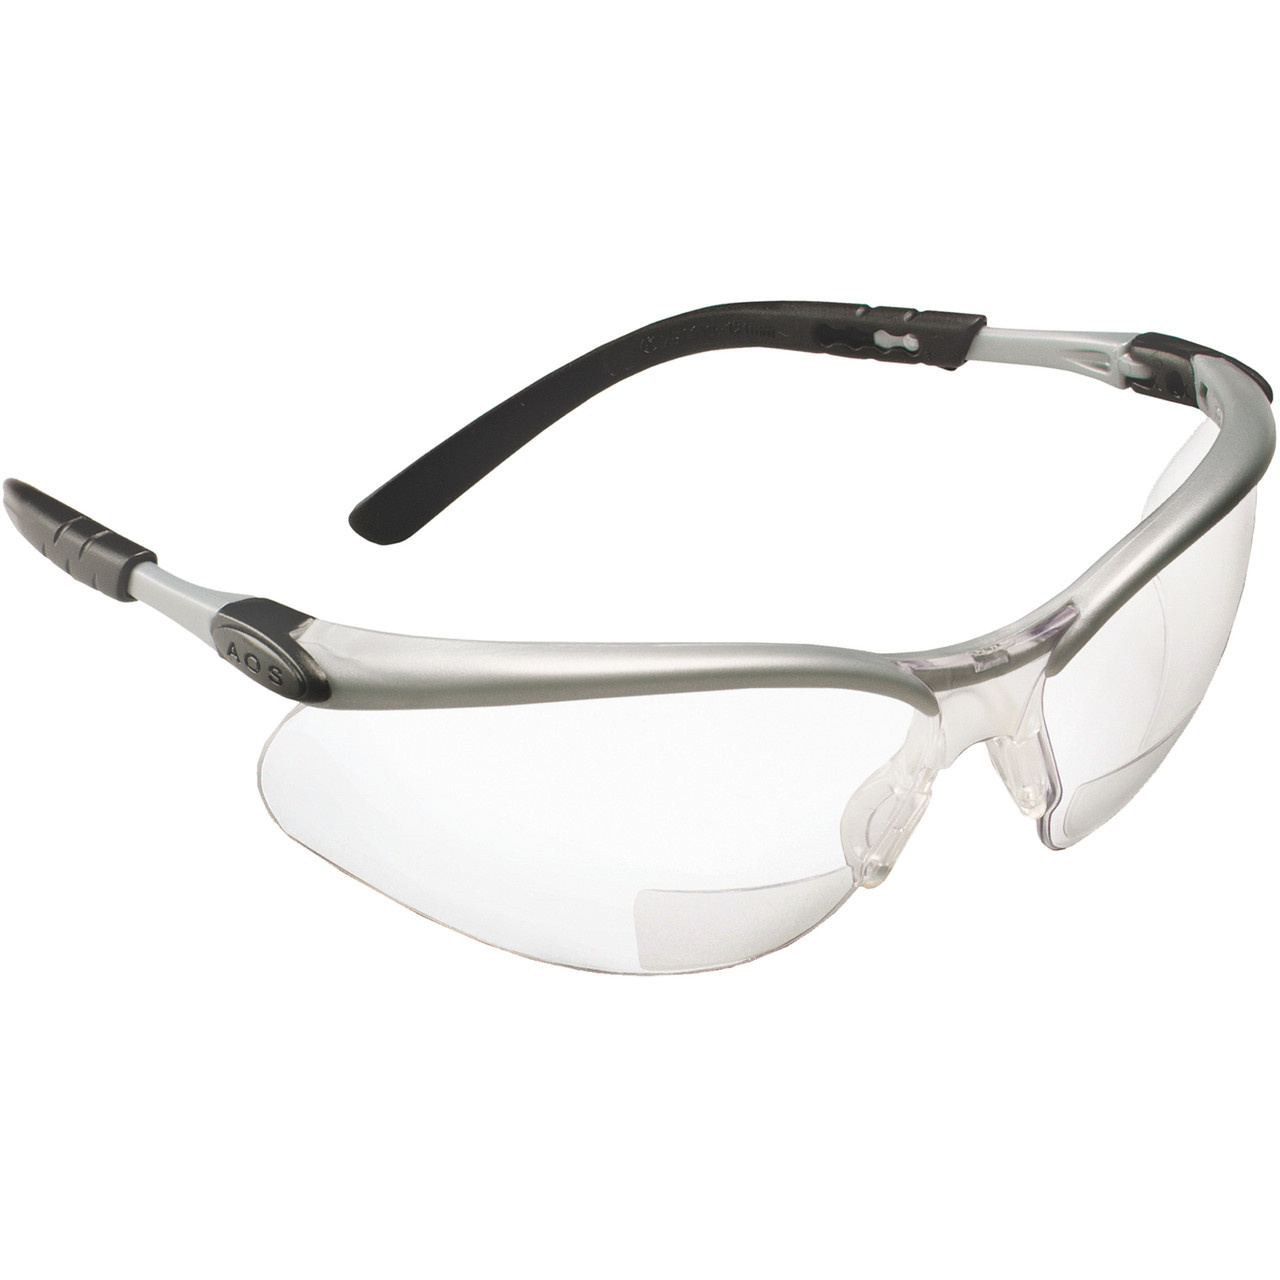 BX® Readers Safety Glasses w/Clear Lens +2.0 Diopter  11375-00000-20